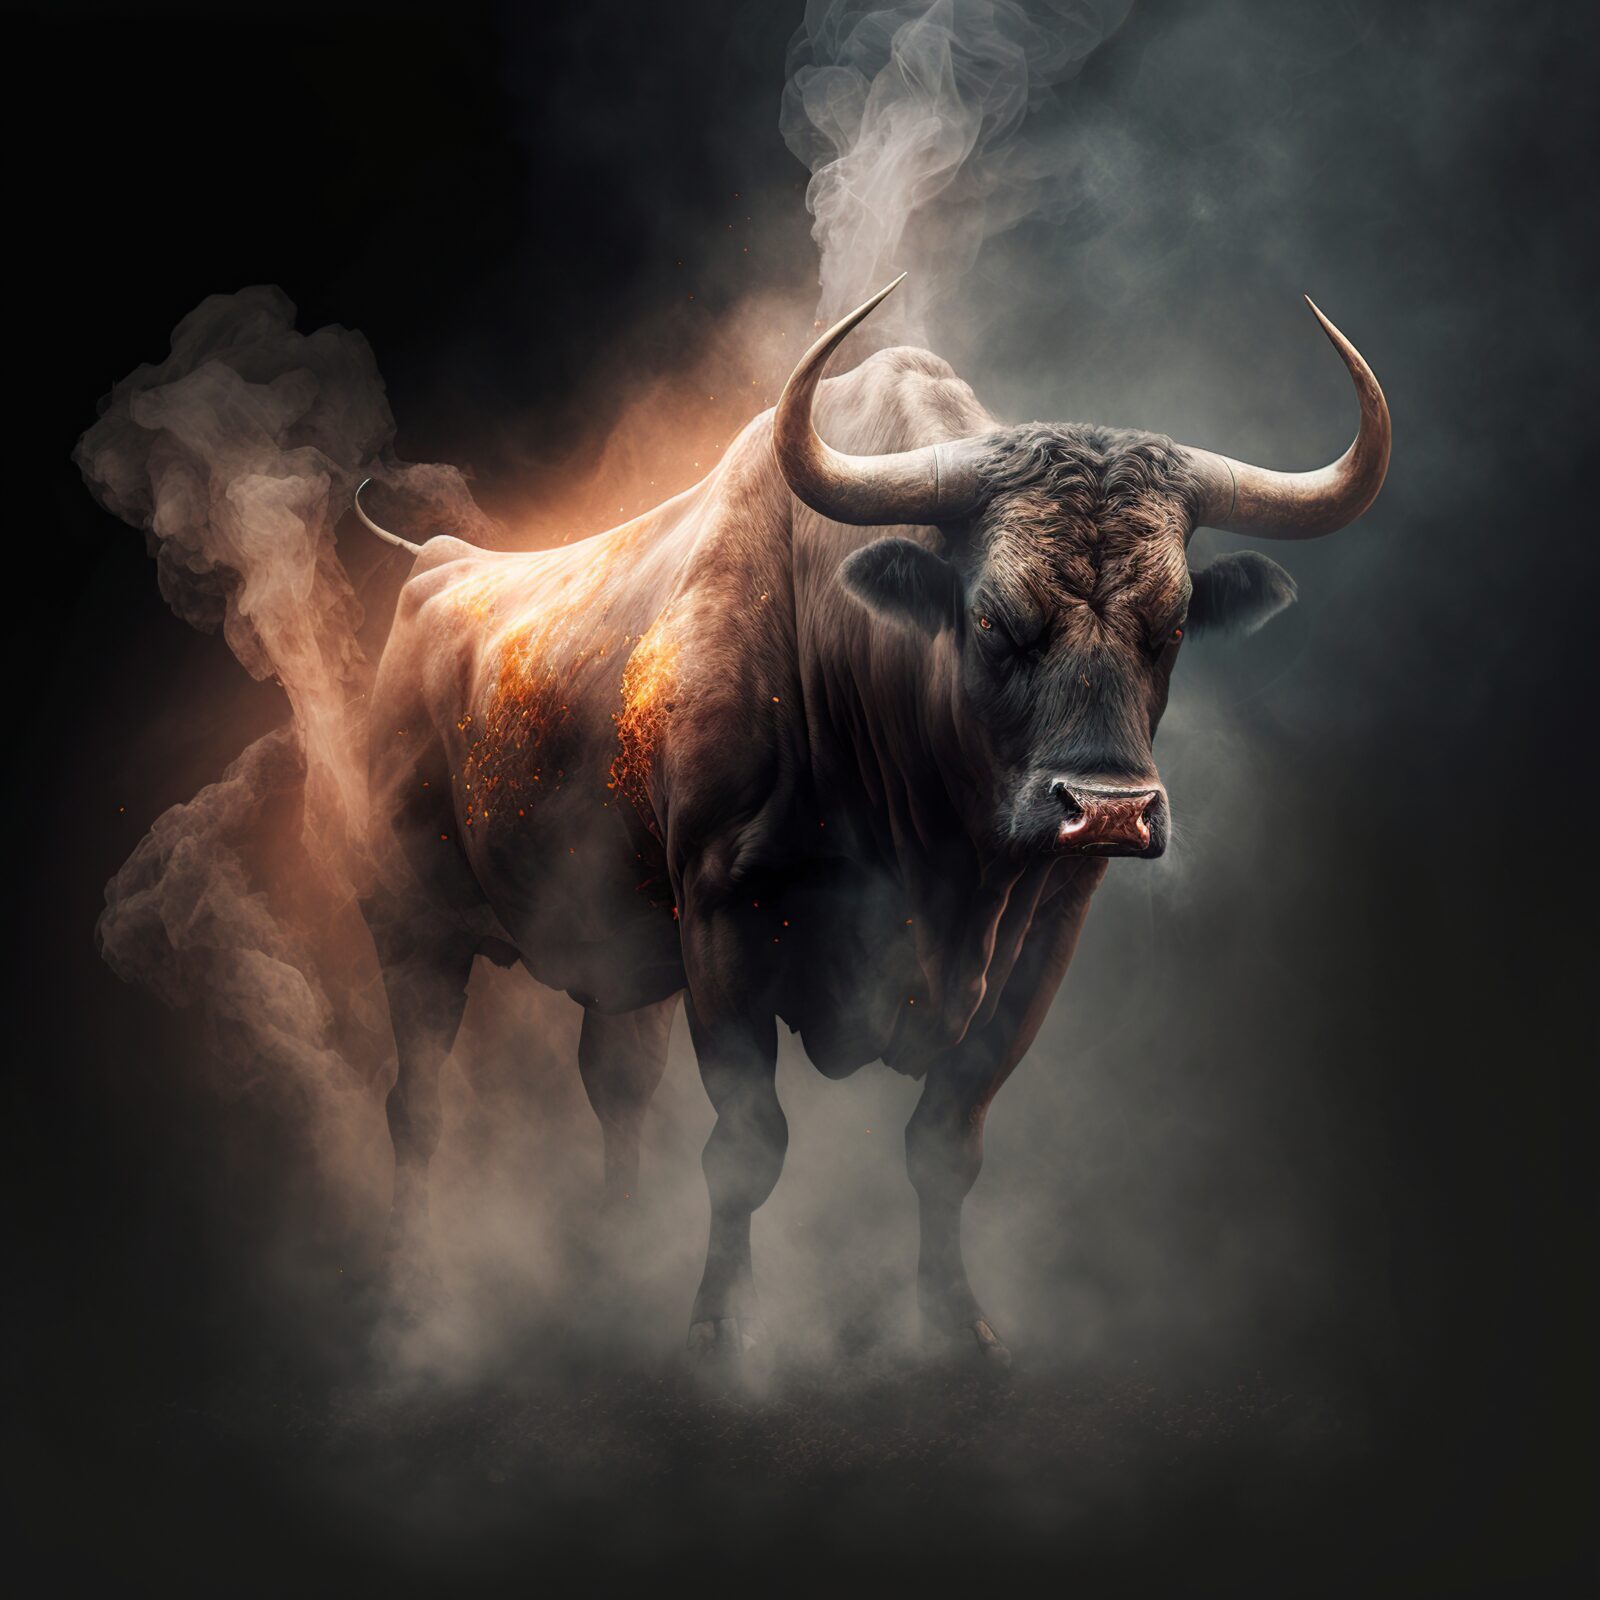 illustration of a fighting bull, smoky environment, image generated by AI